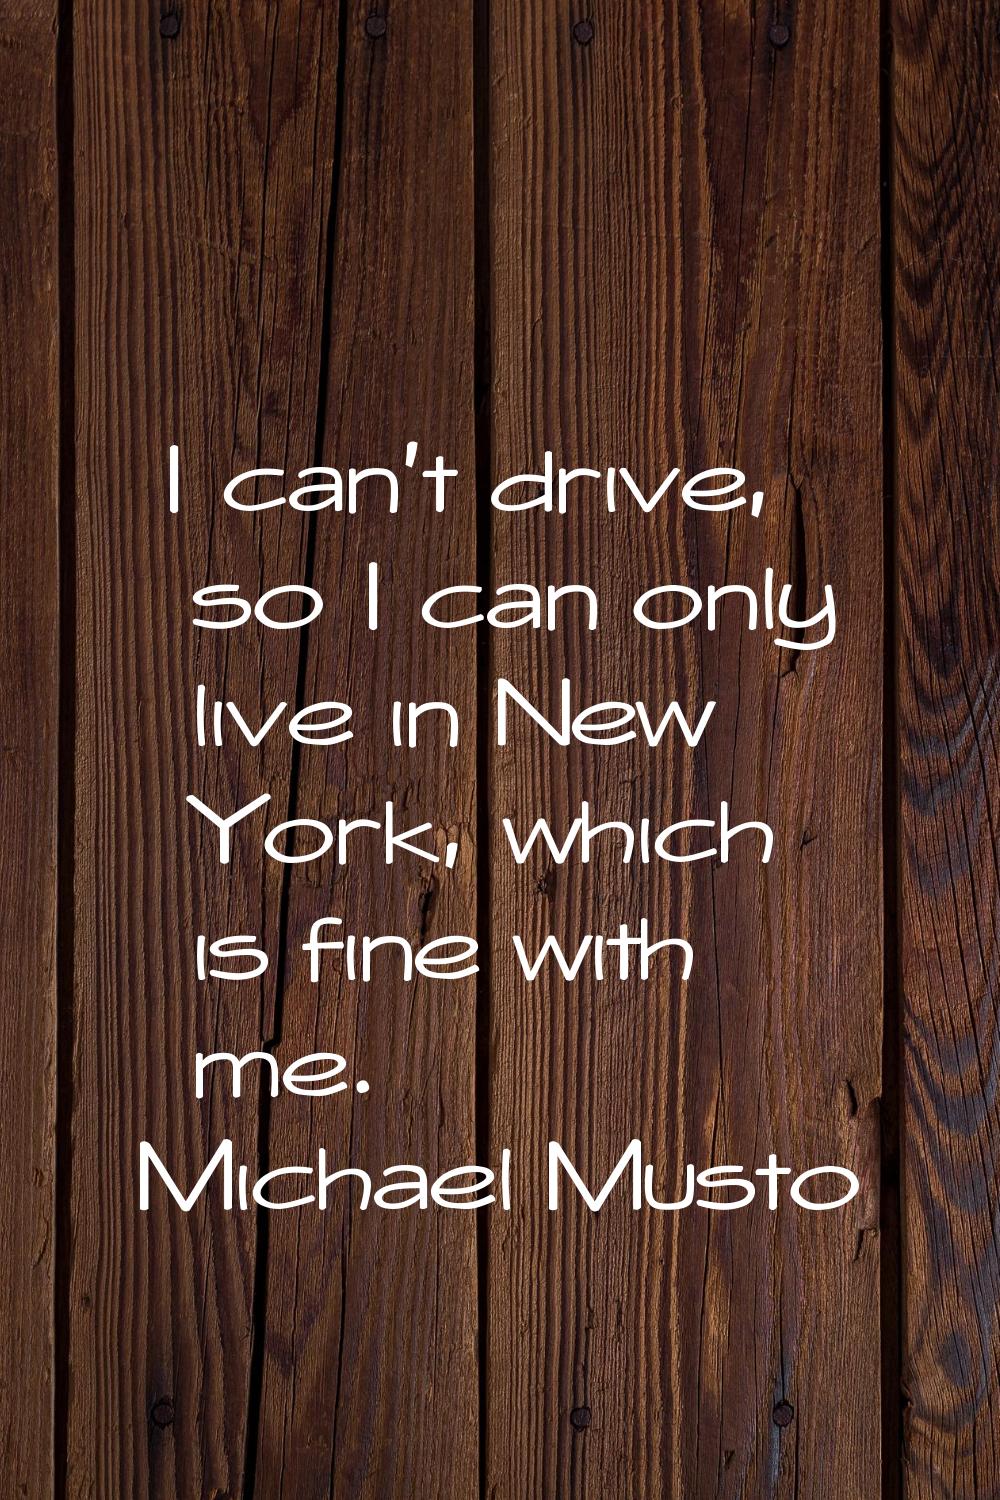 I can't drive, so I can only live in New York, which is fine with me.